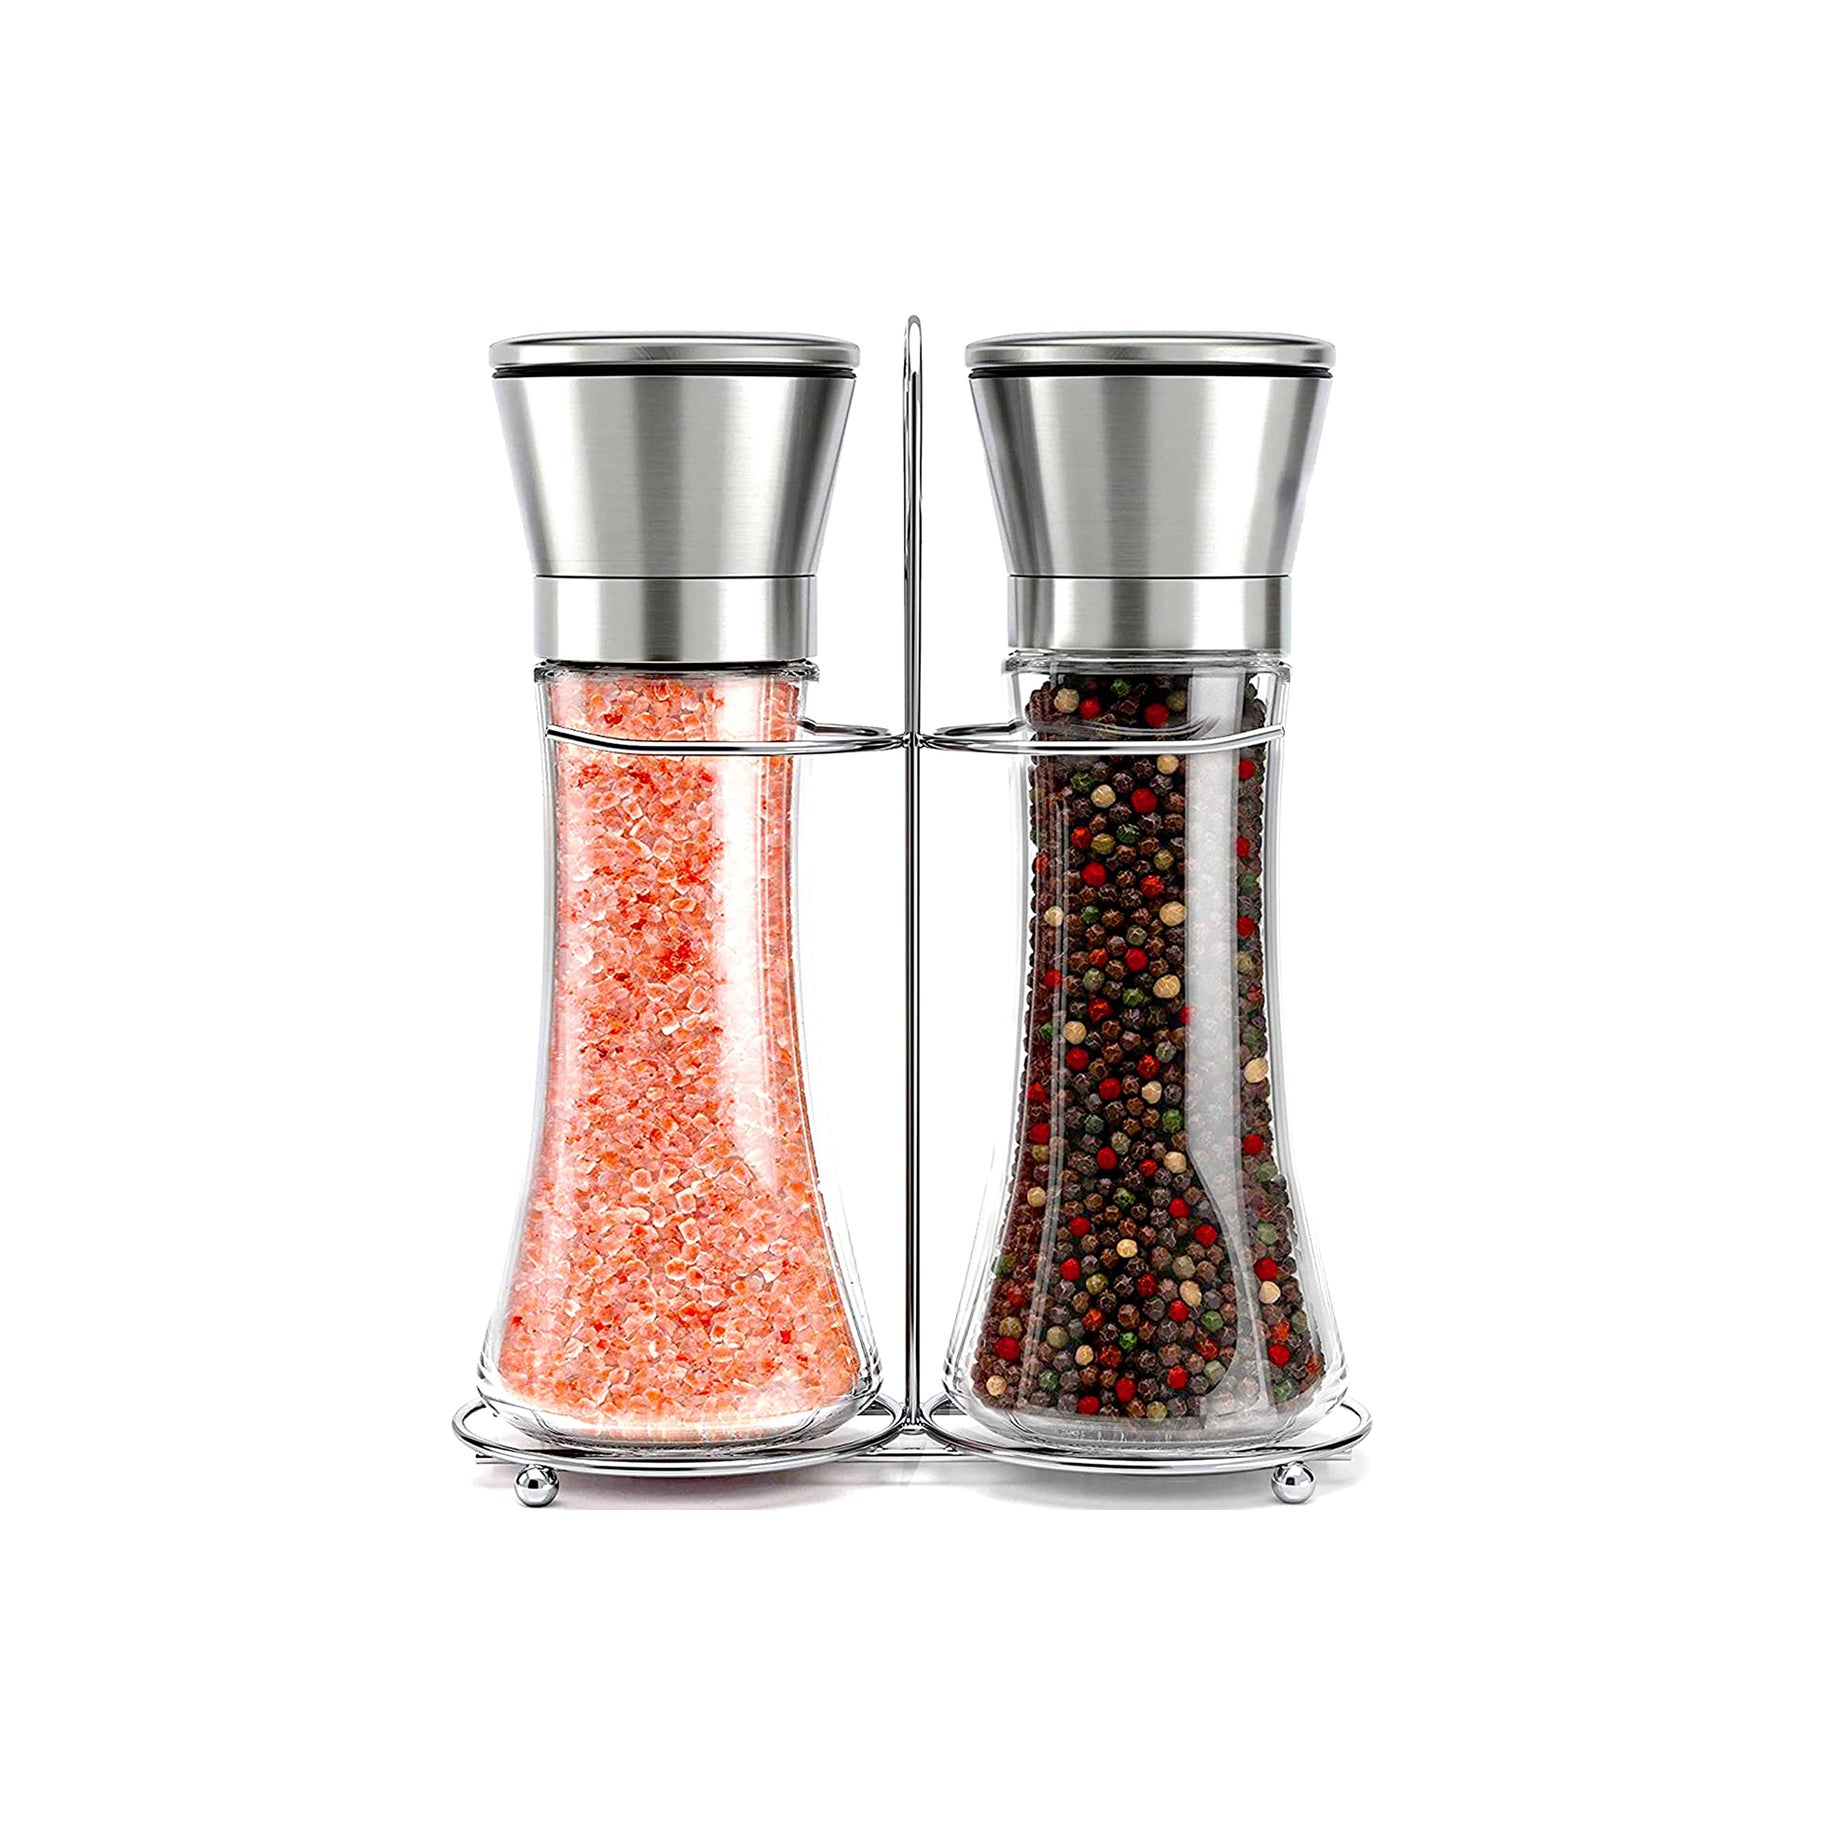 The Best Pepper Mills And Grinders, According To Chefs